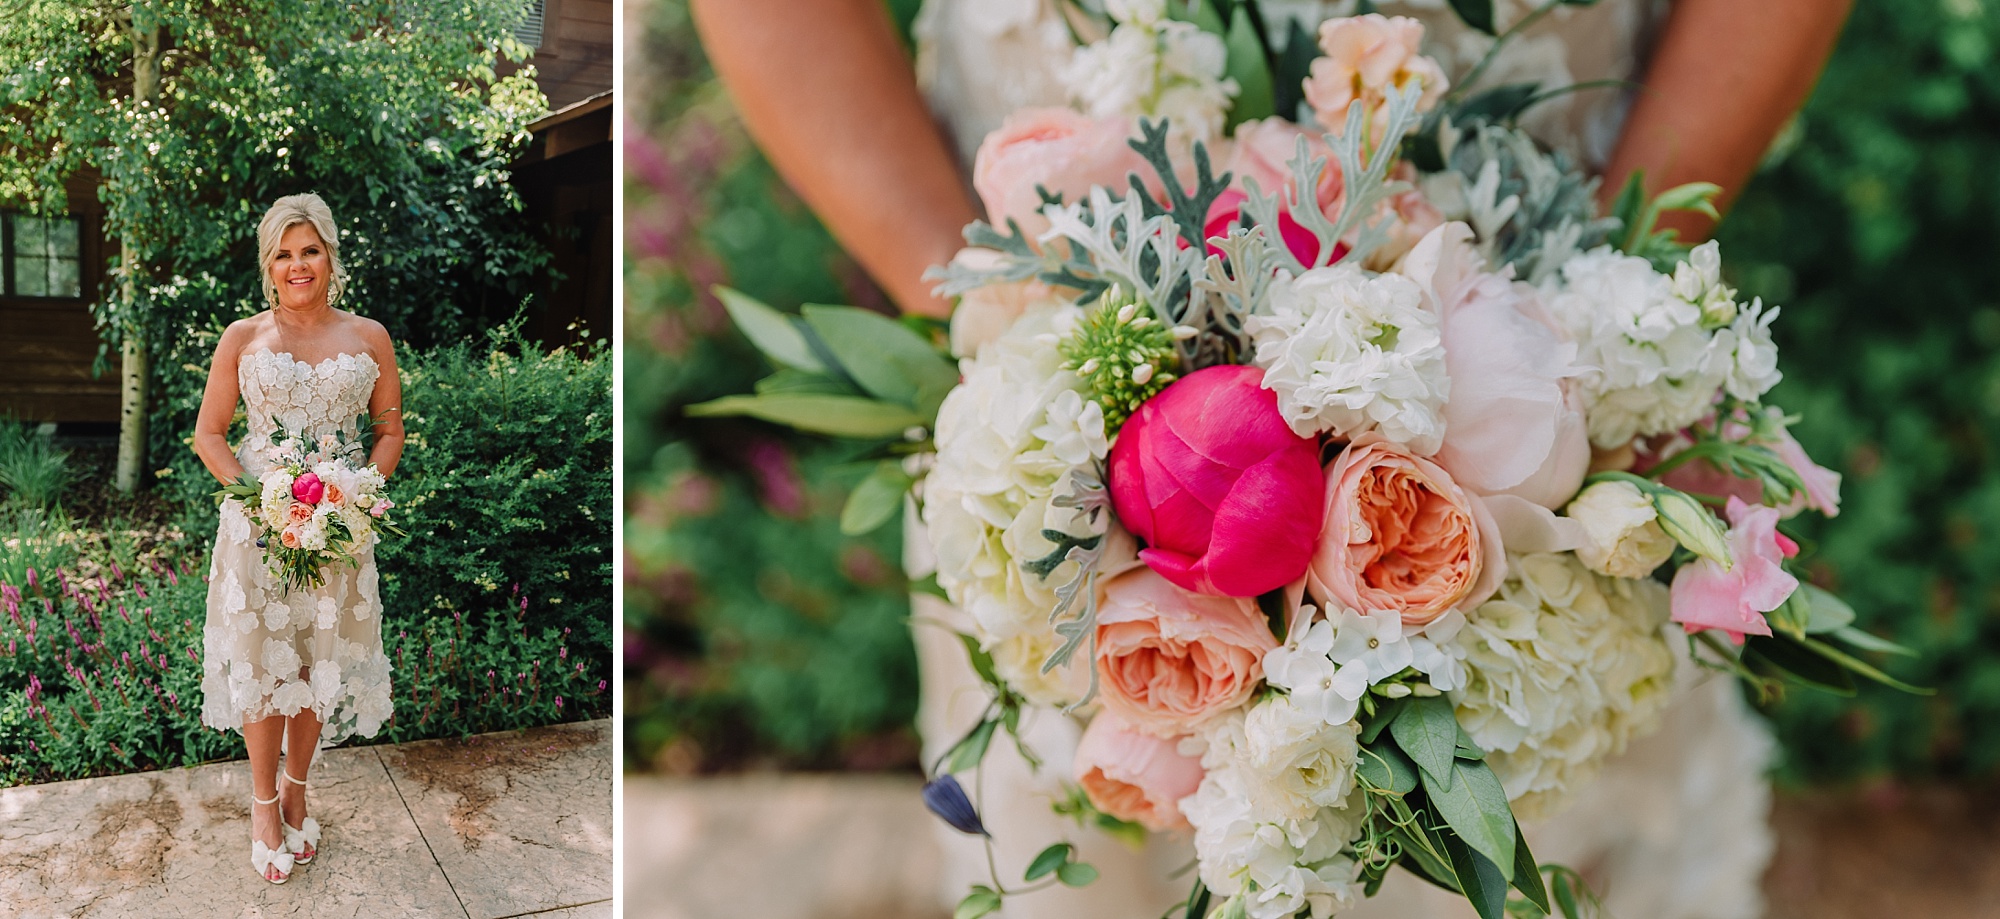 jackson hole florist designed this incredible pink and white bouquet filled with fresh cut florals for their day